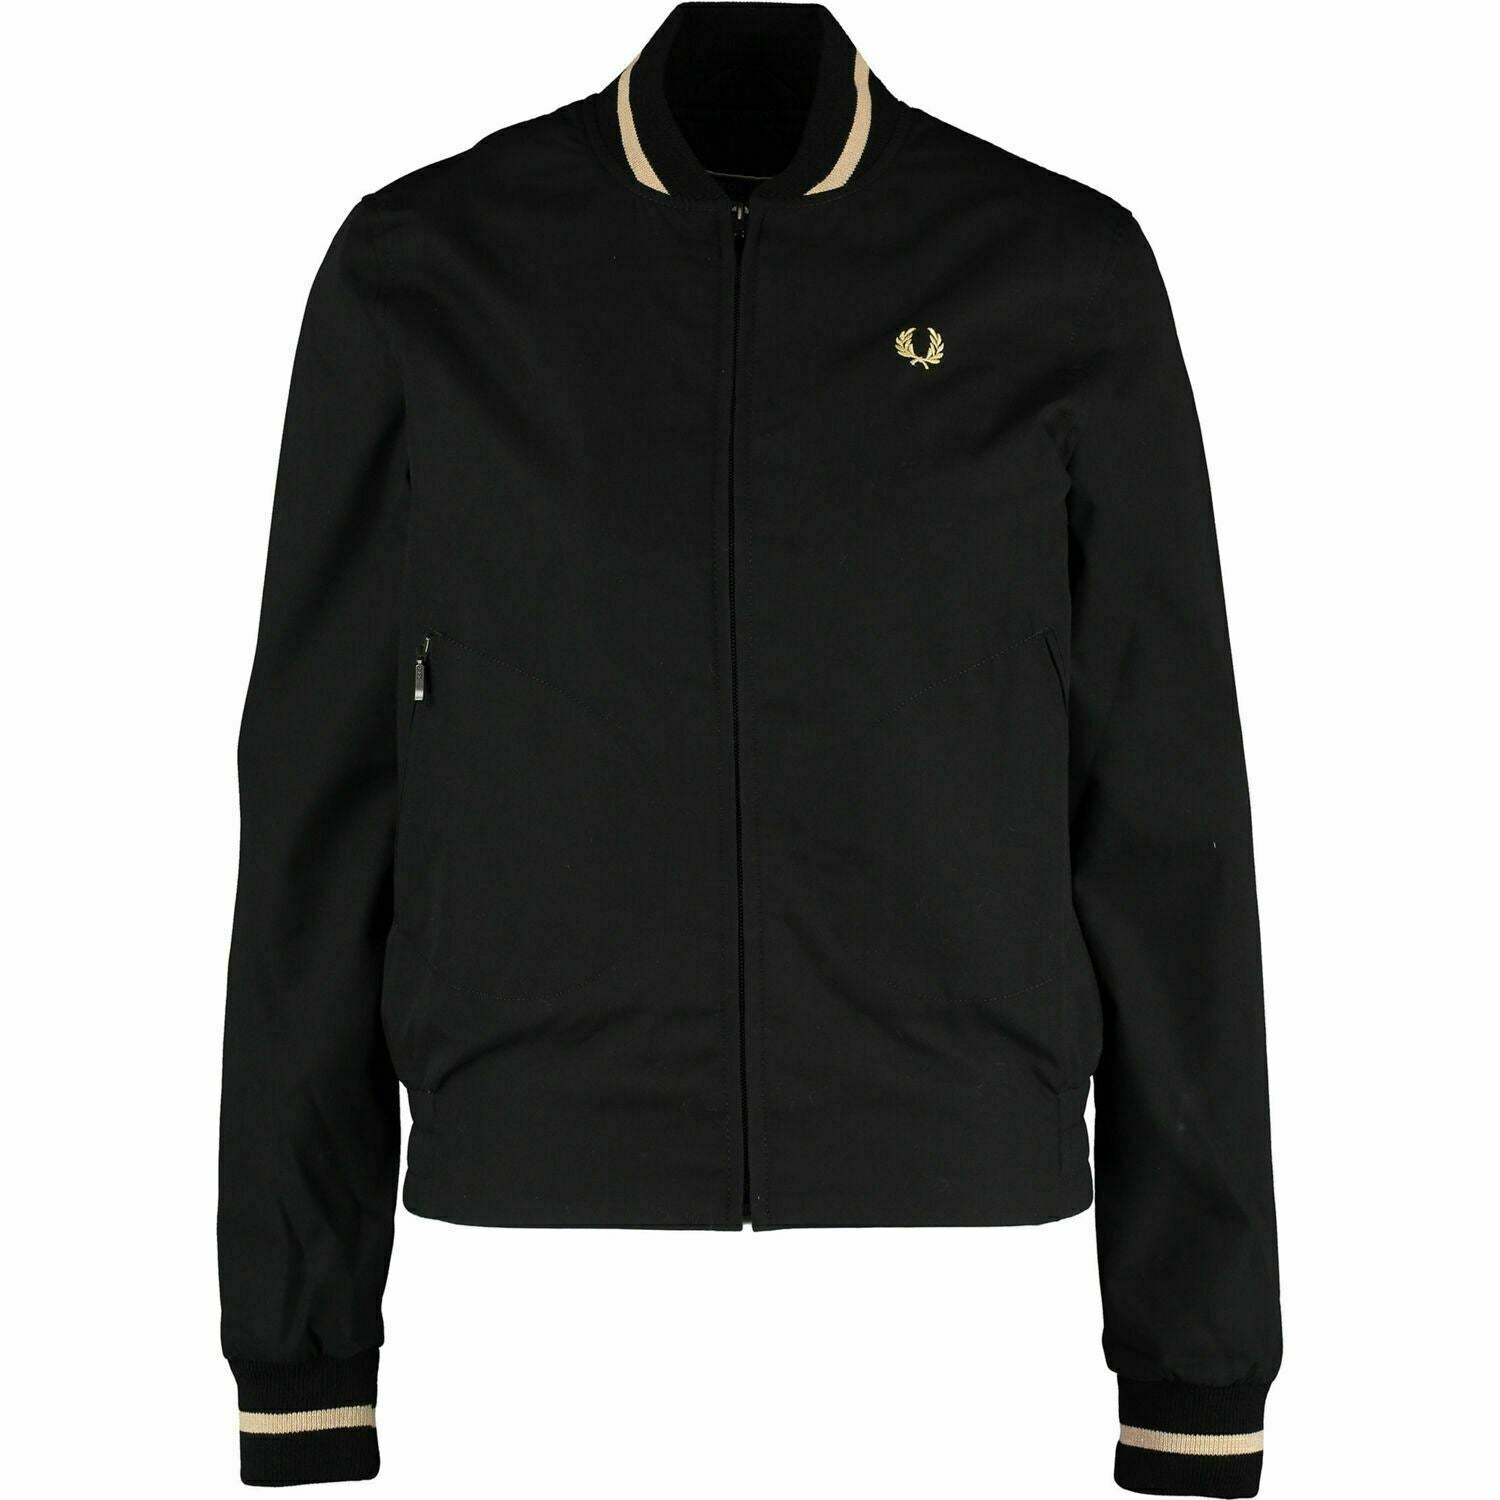 FRED PERRY Womens Tennis Bomber Jacket, Black/Champagne, size UK 8